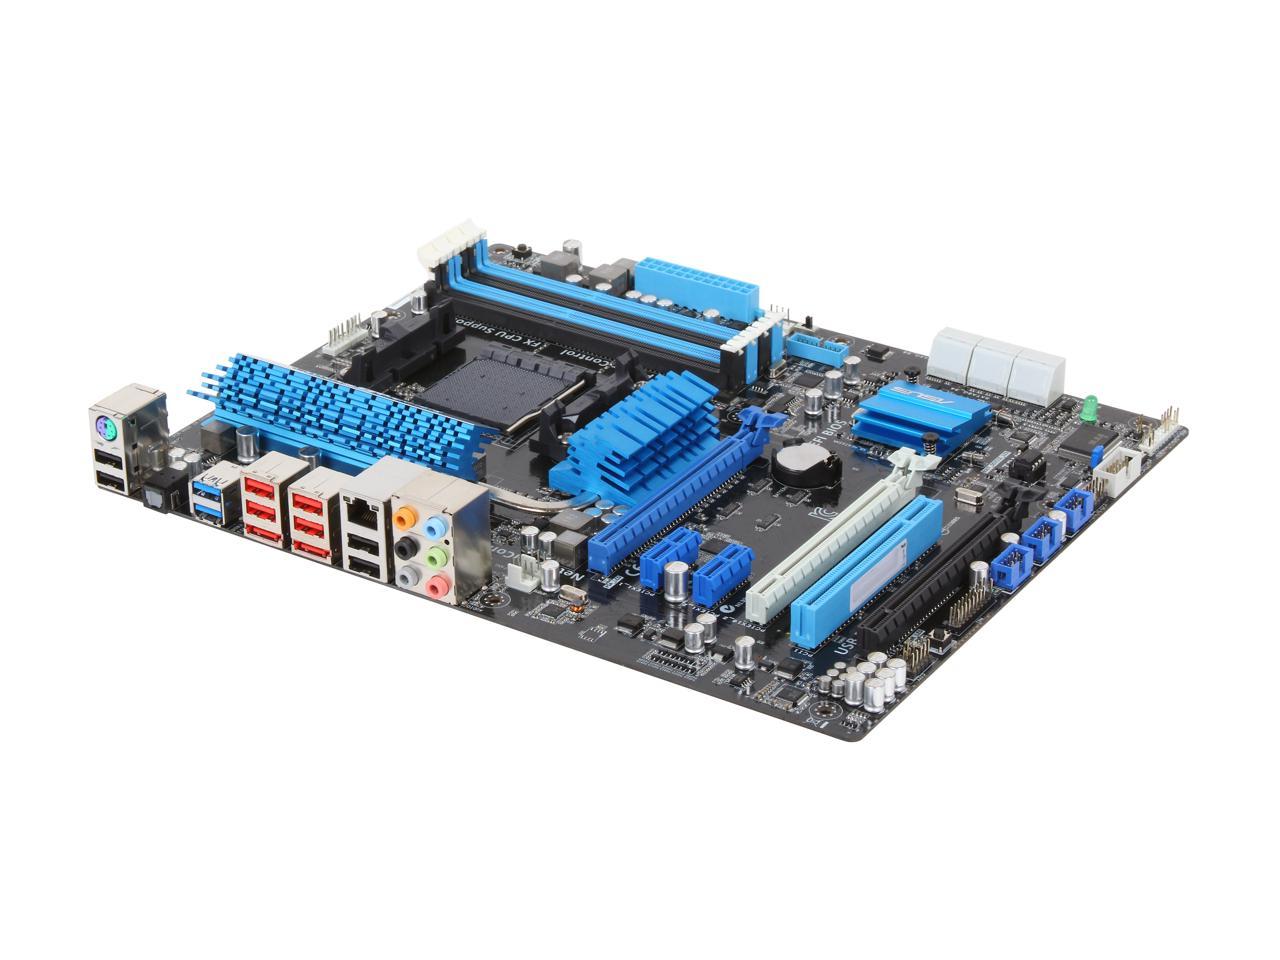 ASUS M5A99X EVO R2.0 AM3+ AMD 990X + SB950 SATA 6Gb/s USB 3.0 ATX AMD Motherboard with UEFI BIOS